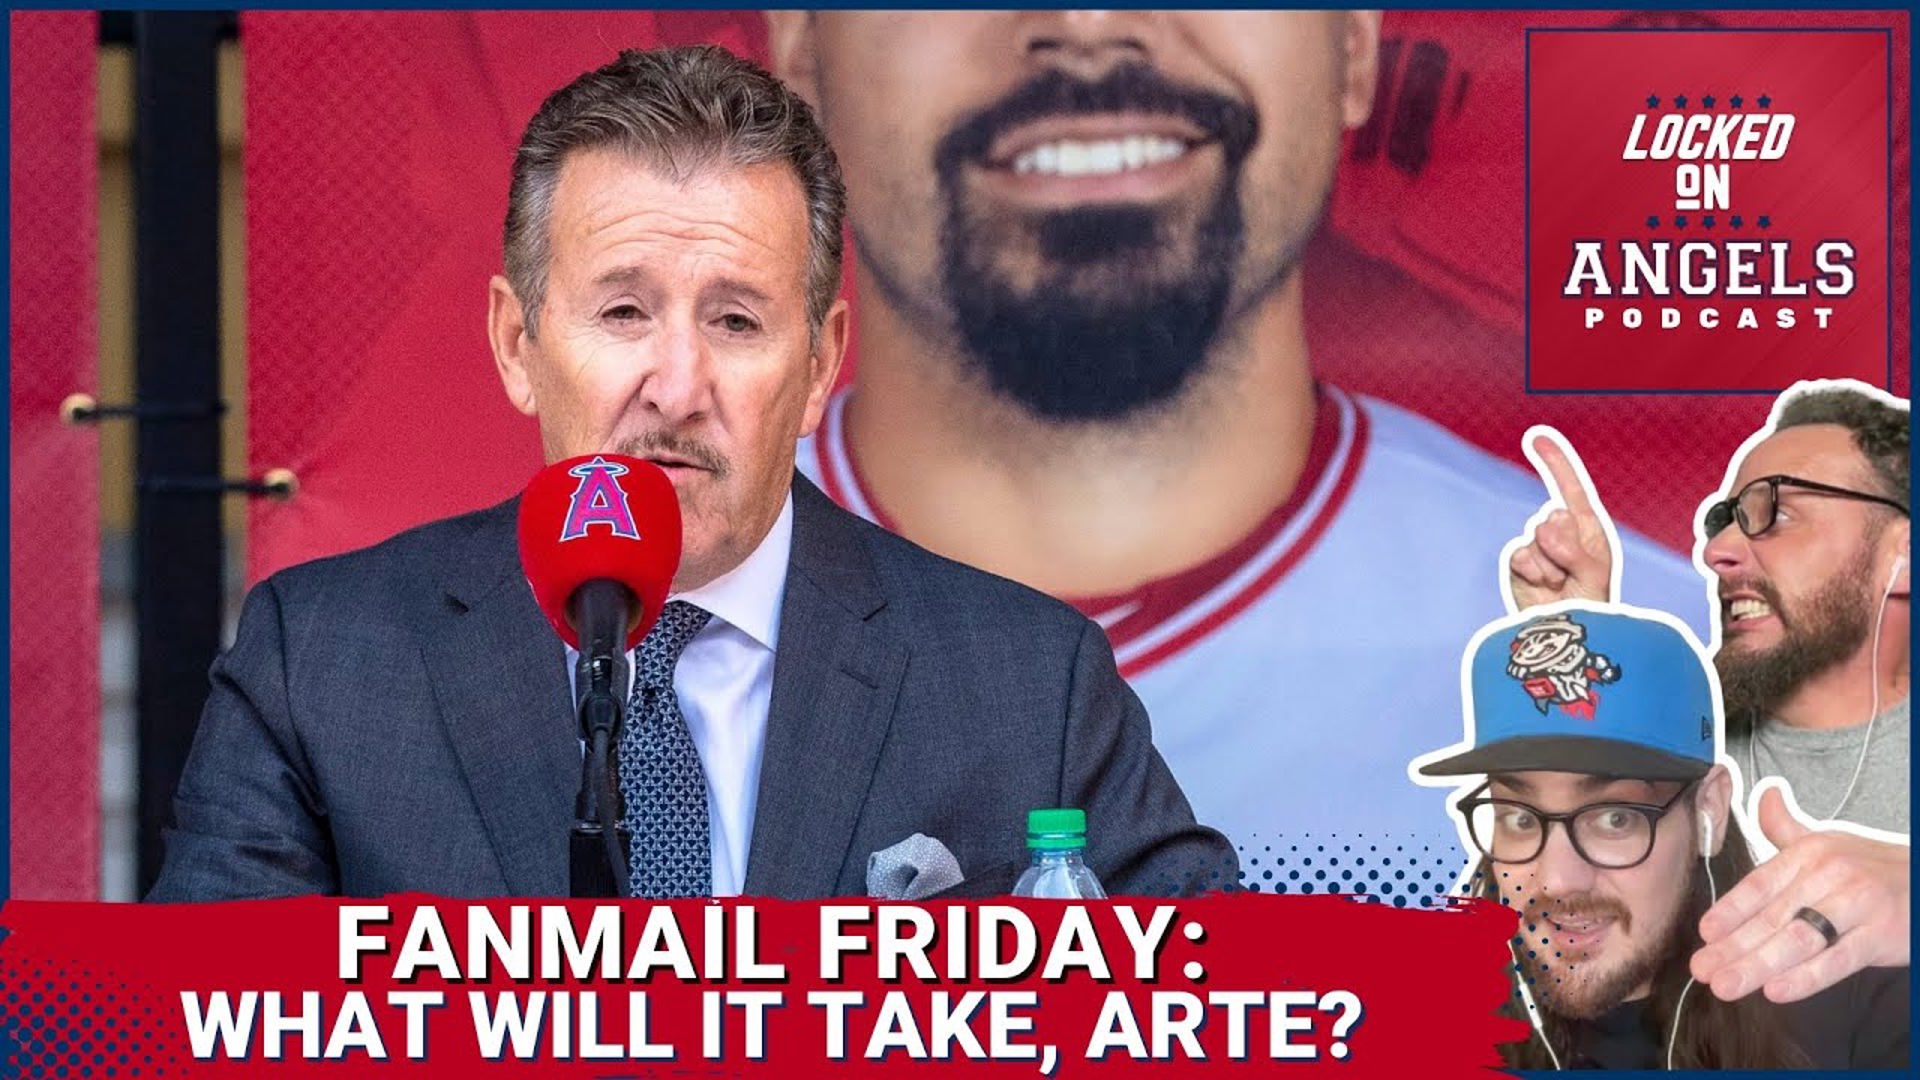 All your Los Angeles Angels questions will be answered, because it's FANMAIL FRIDAY on Locked On Angels!